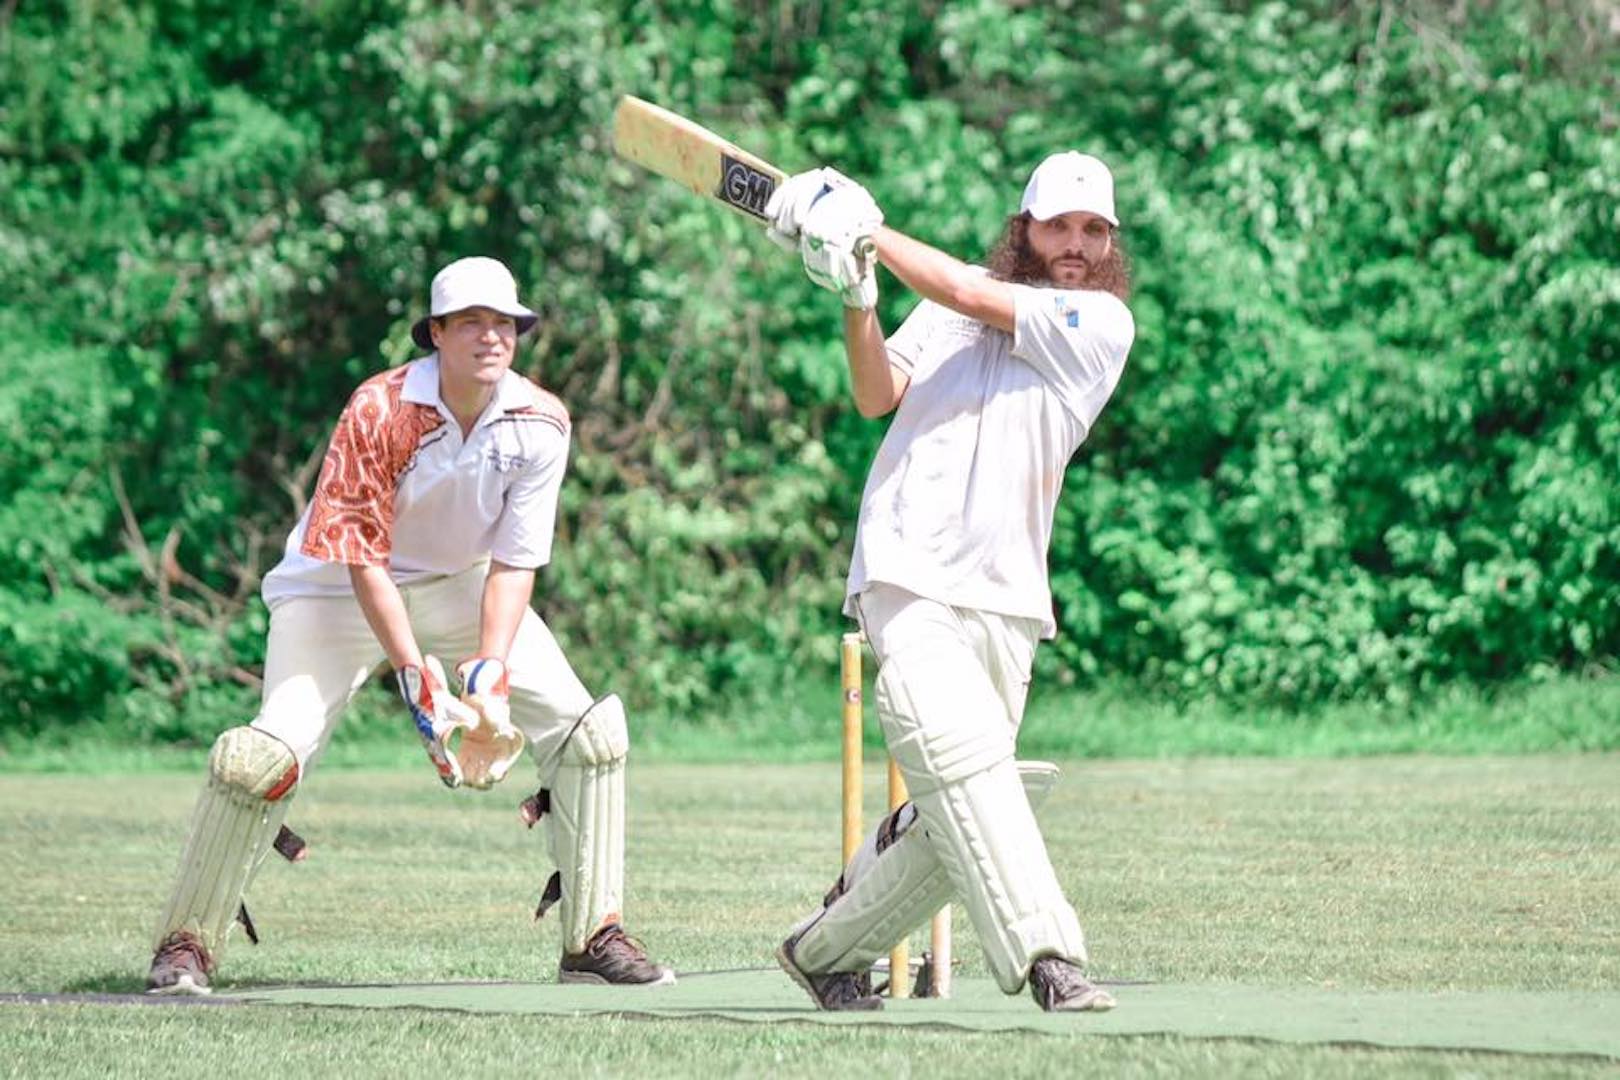 Brazil,Cricket players in Brasil will square off in the Nationals Championship this weekend in Rio.